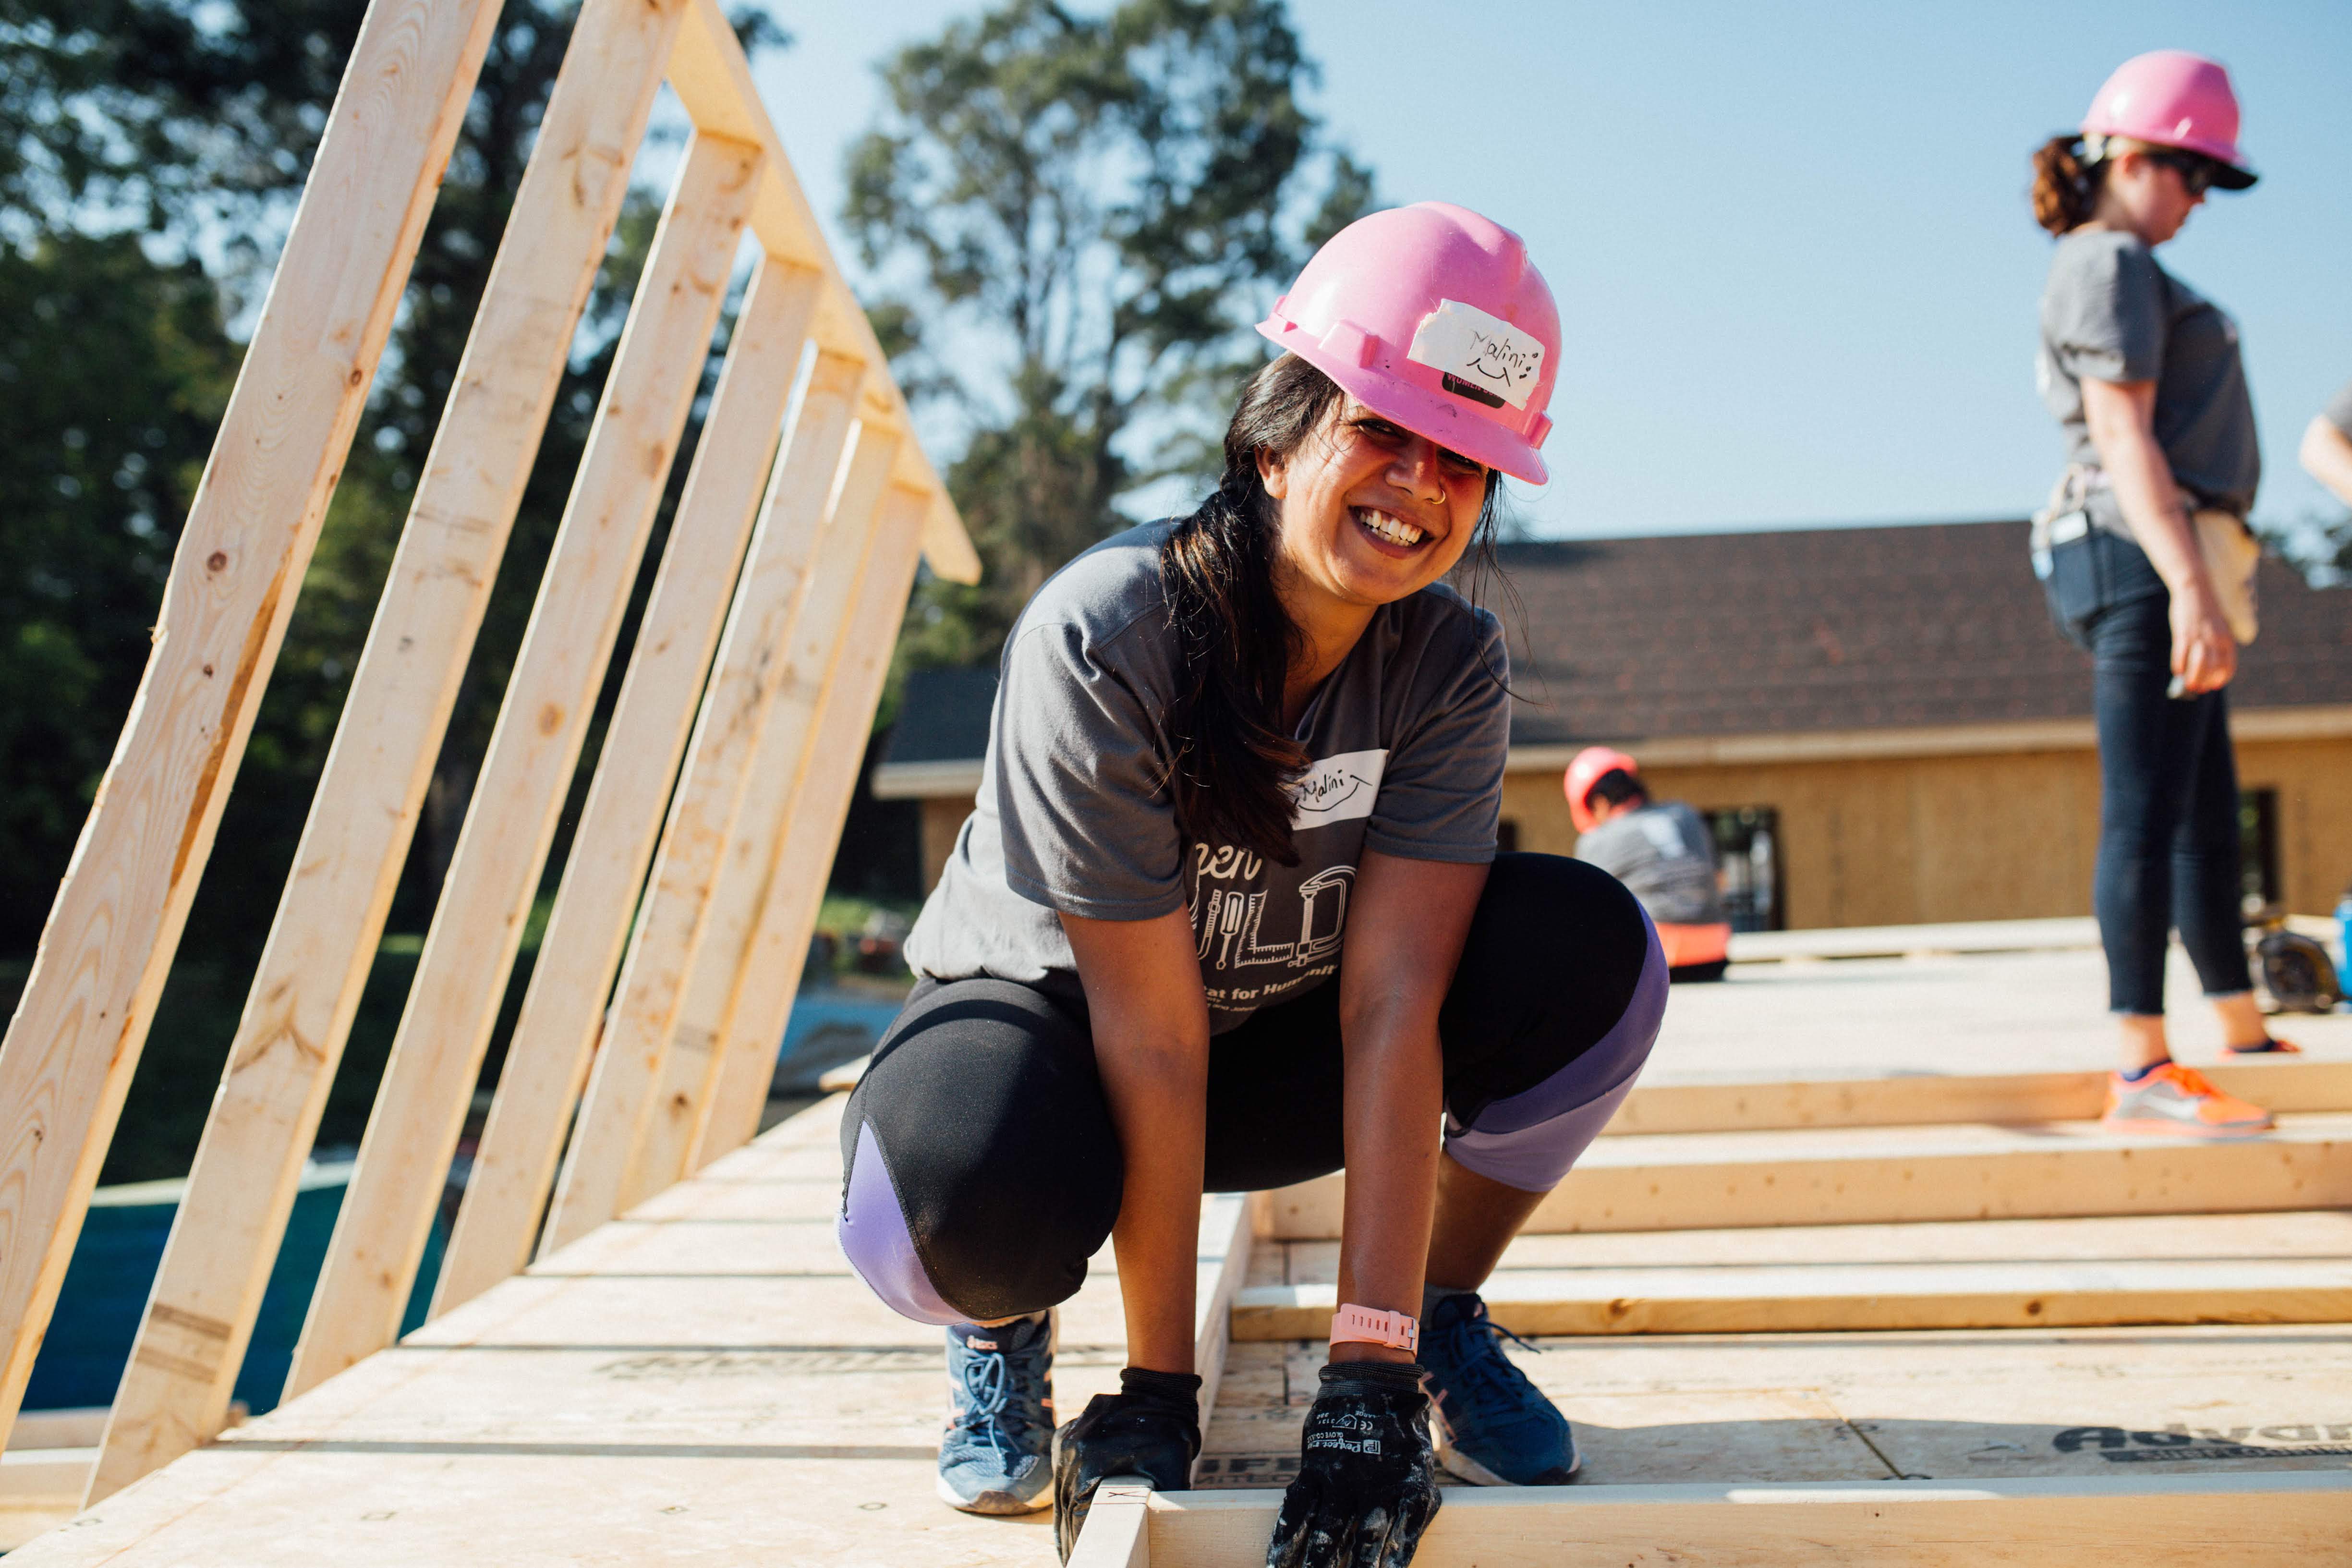 A women volunteering on a build site